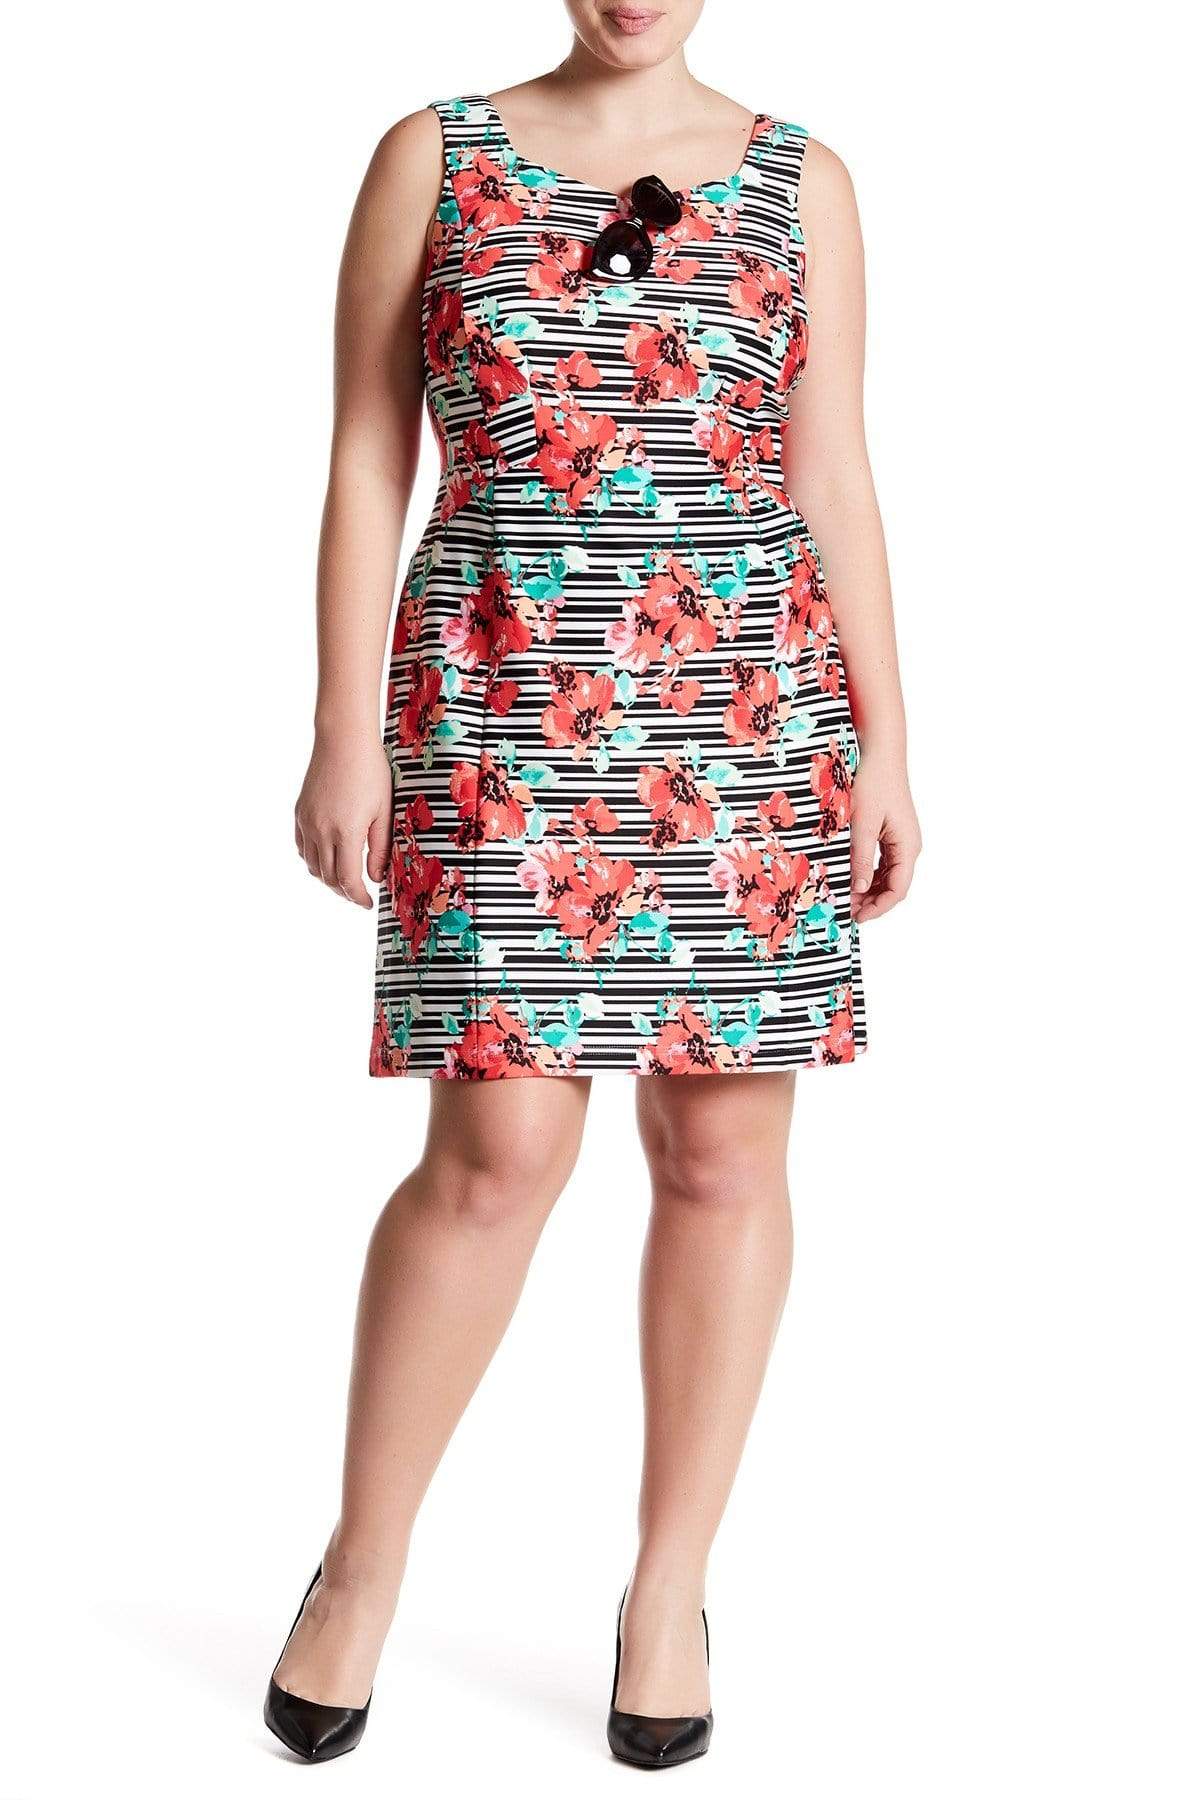 Adrianna Papell - AP1D100873 Floral Striped Sheath Cocktail Dress